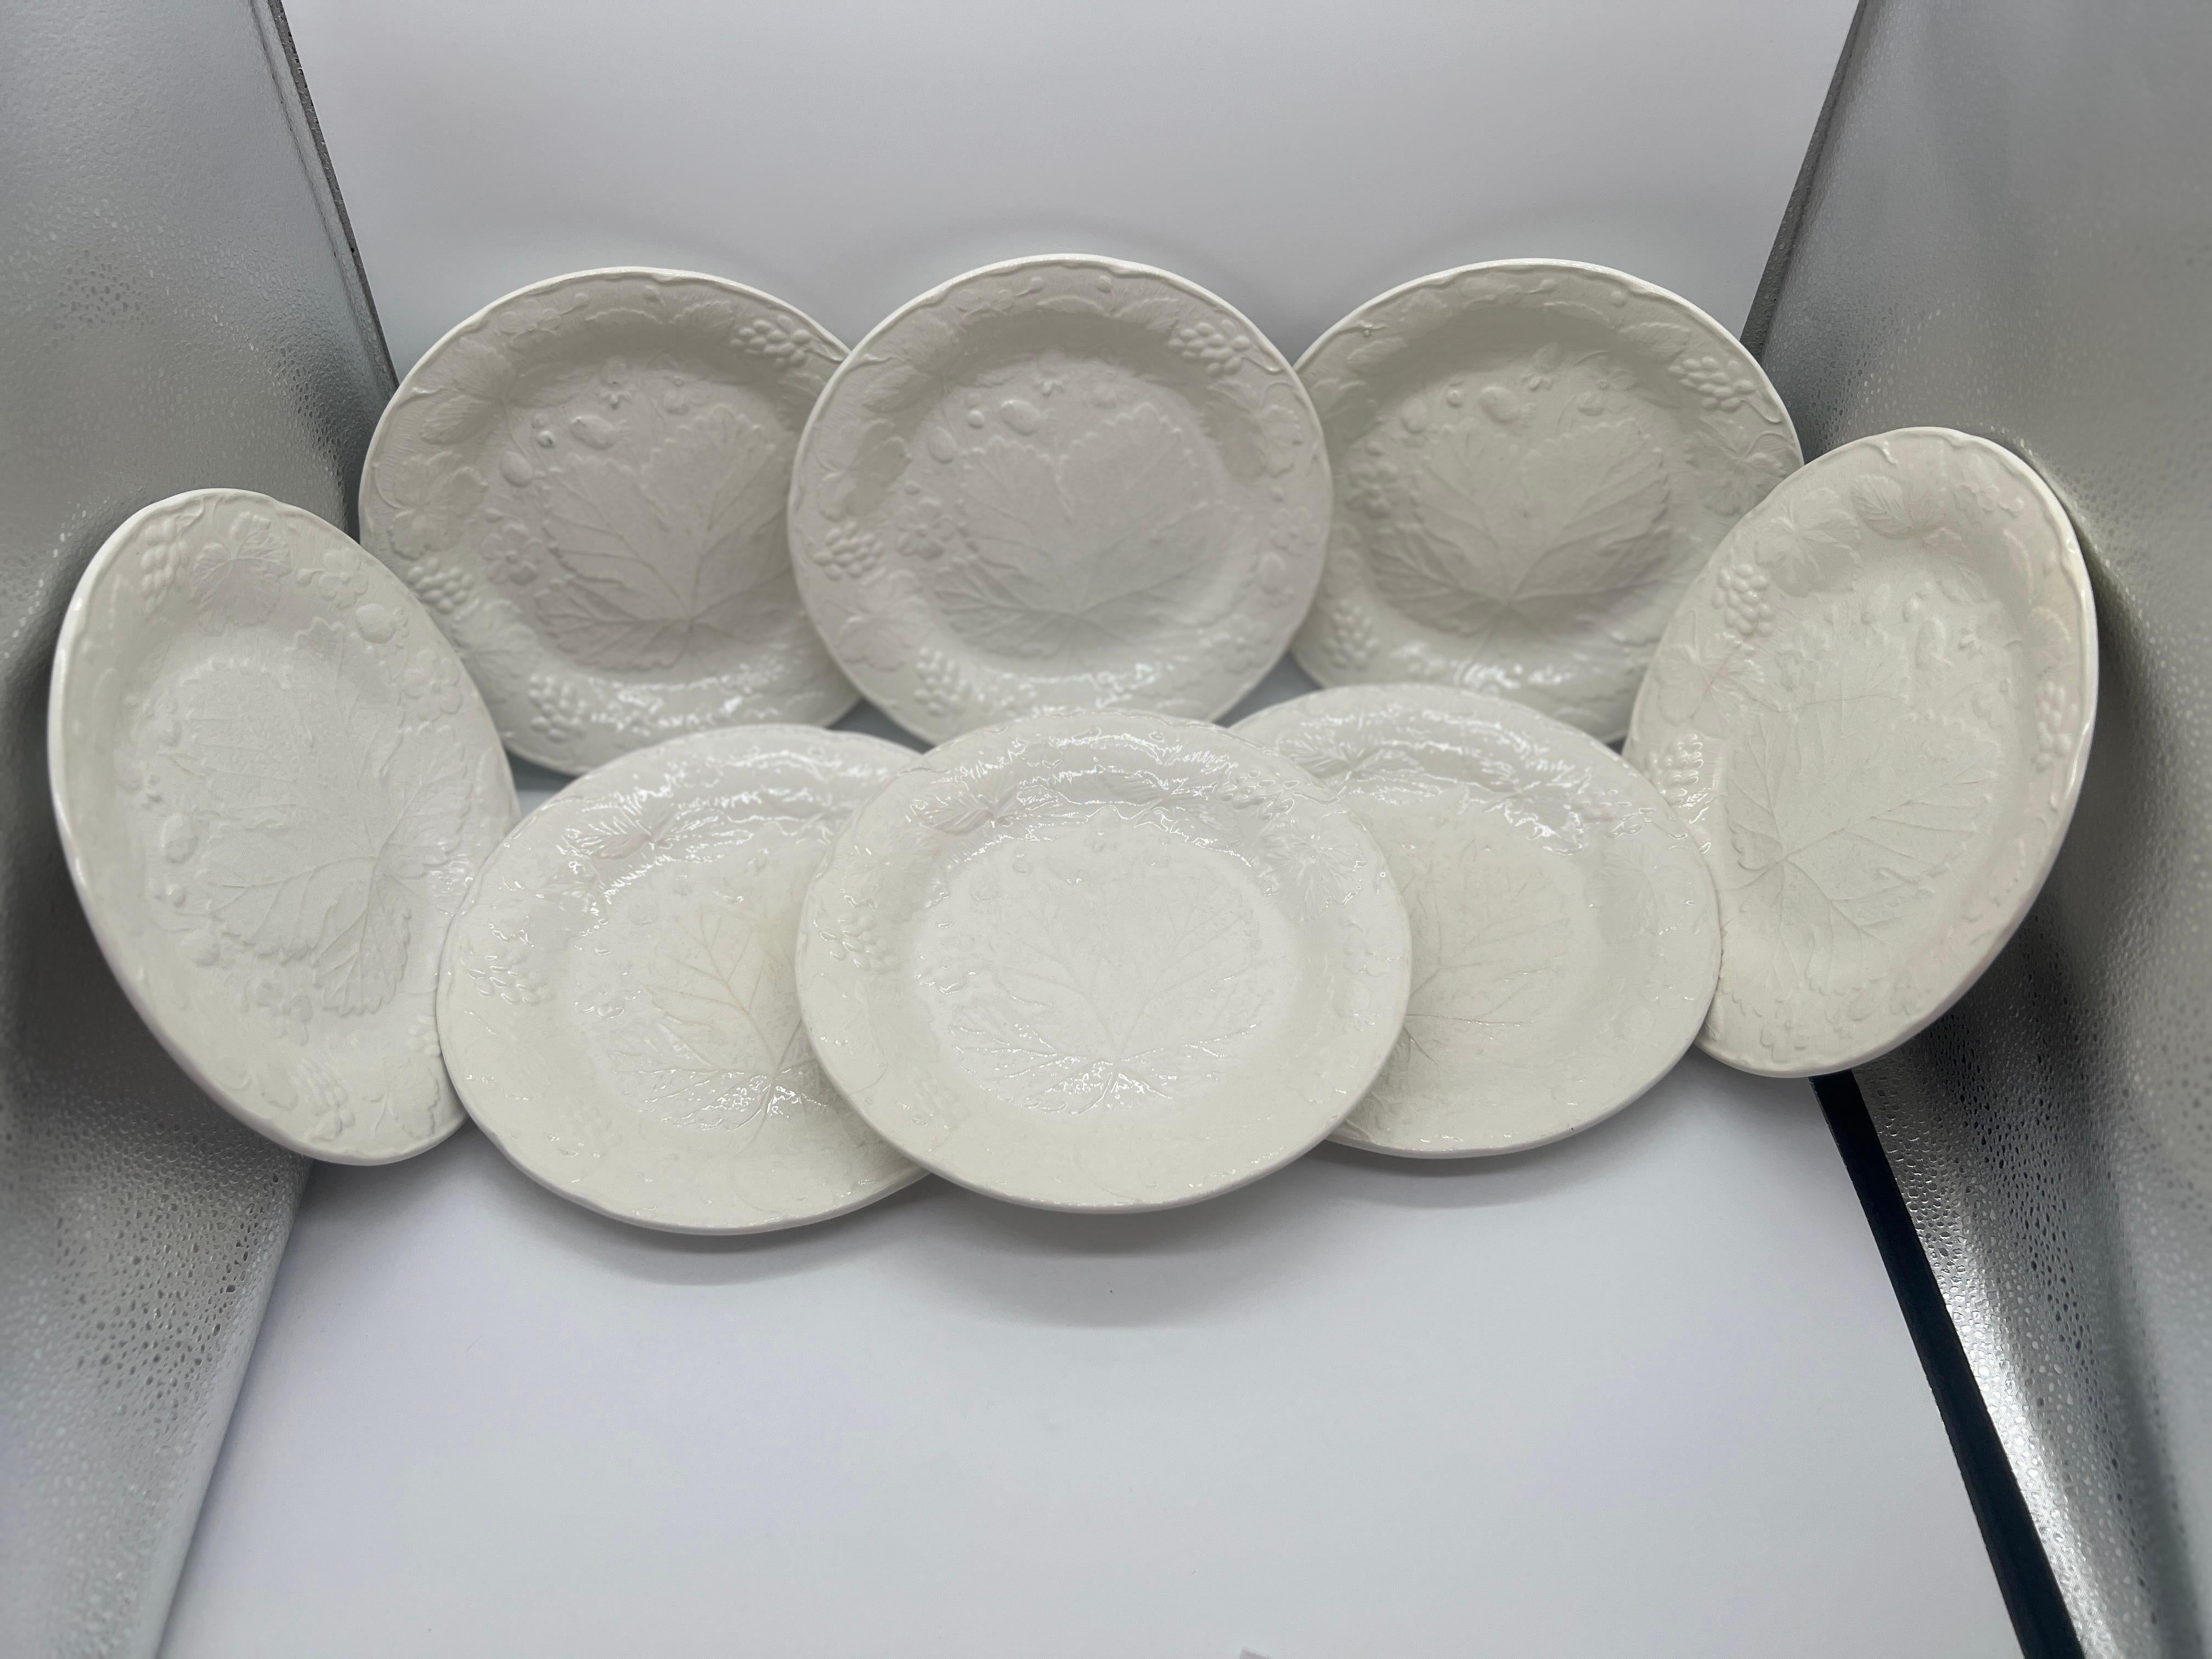 Burleigh BURGESS & LEIGH (English, founded 1851), active 1988-2005. 

A set of (8) eight dinner plates in the Strawberry and Grape Leaf pattern. Each marked to underside. 